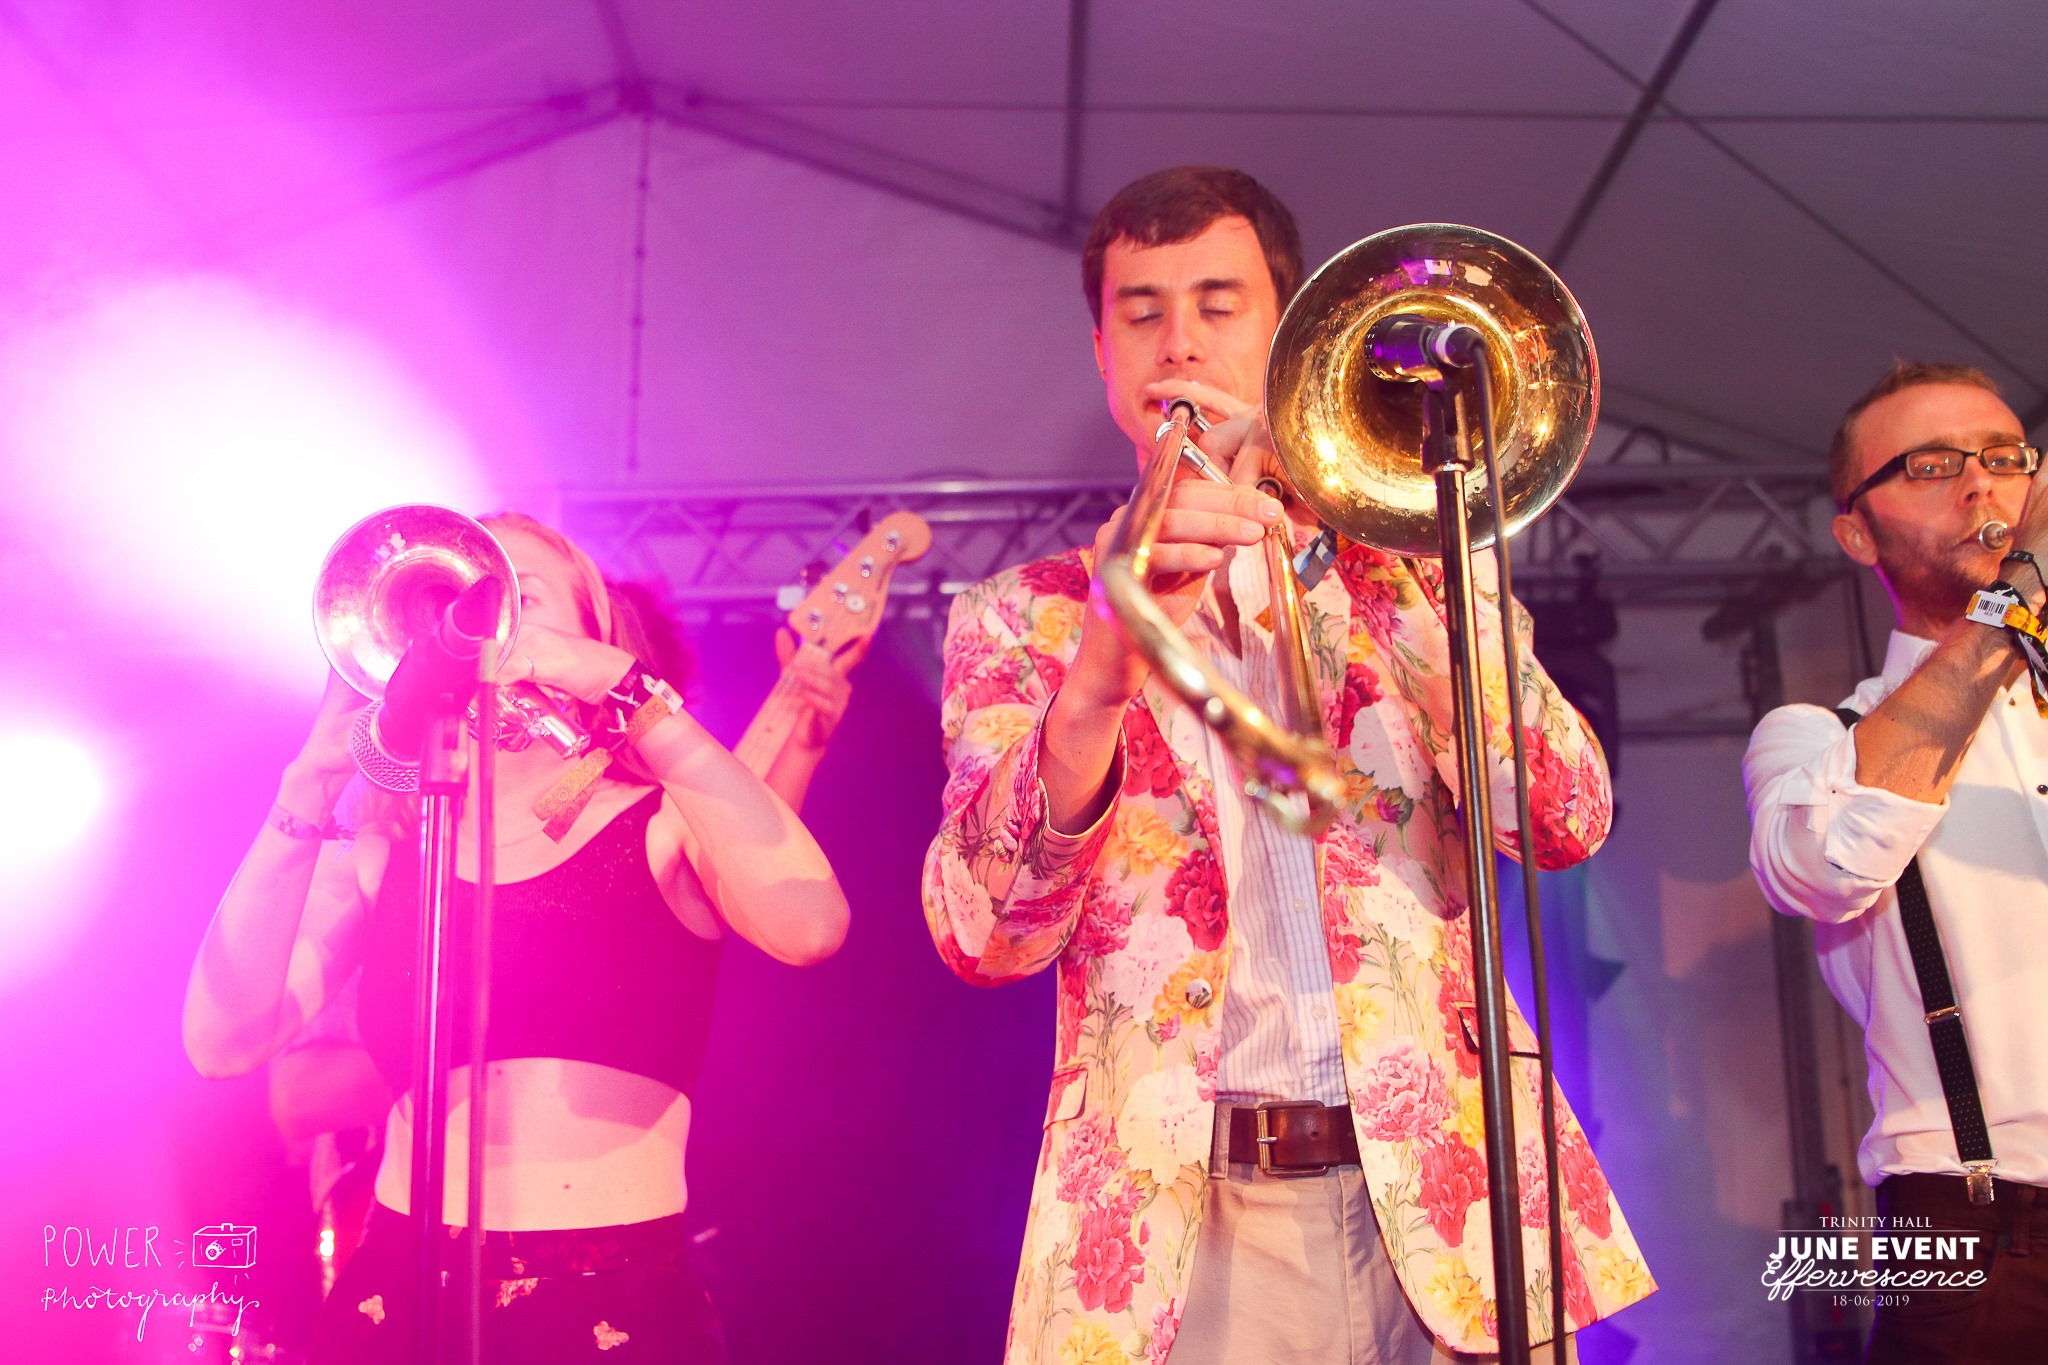 Nick playing the trombone at Trinity Hall June Event in Cambridge